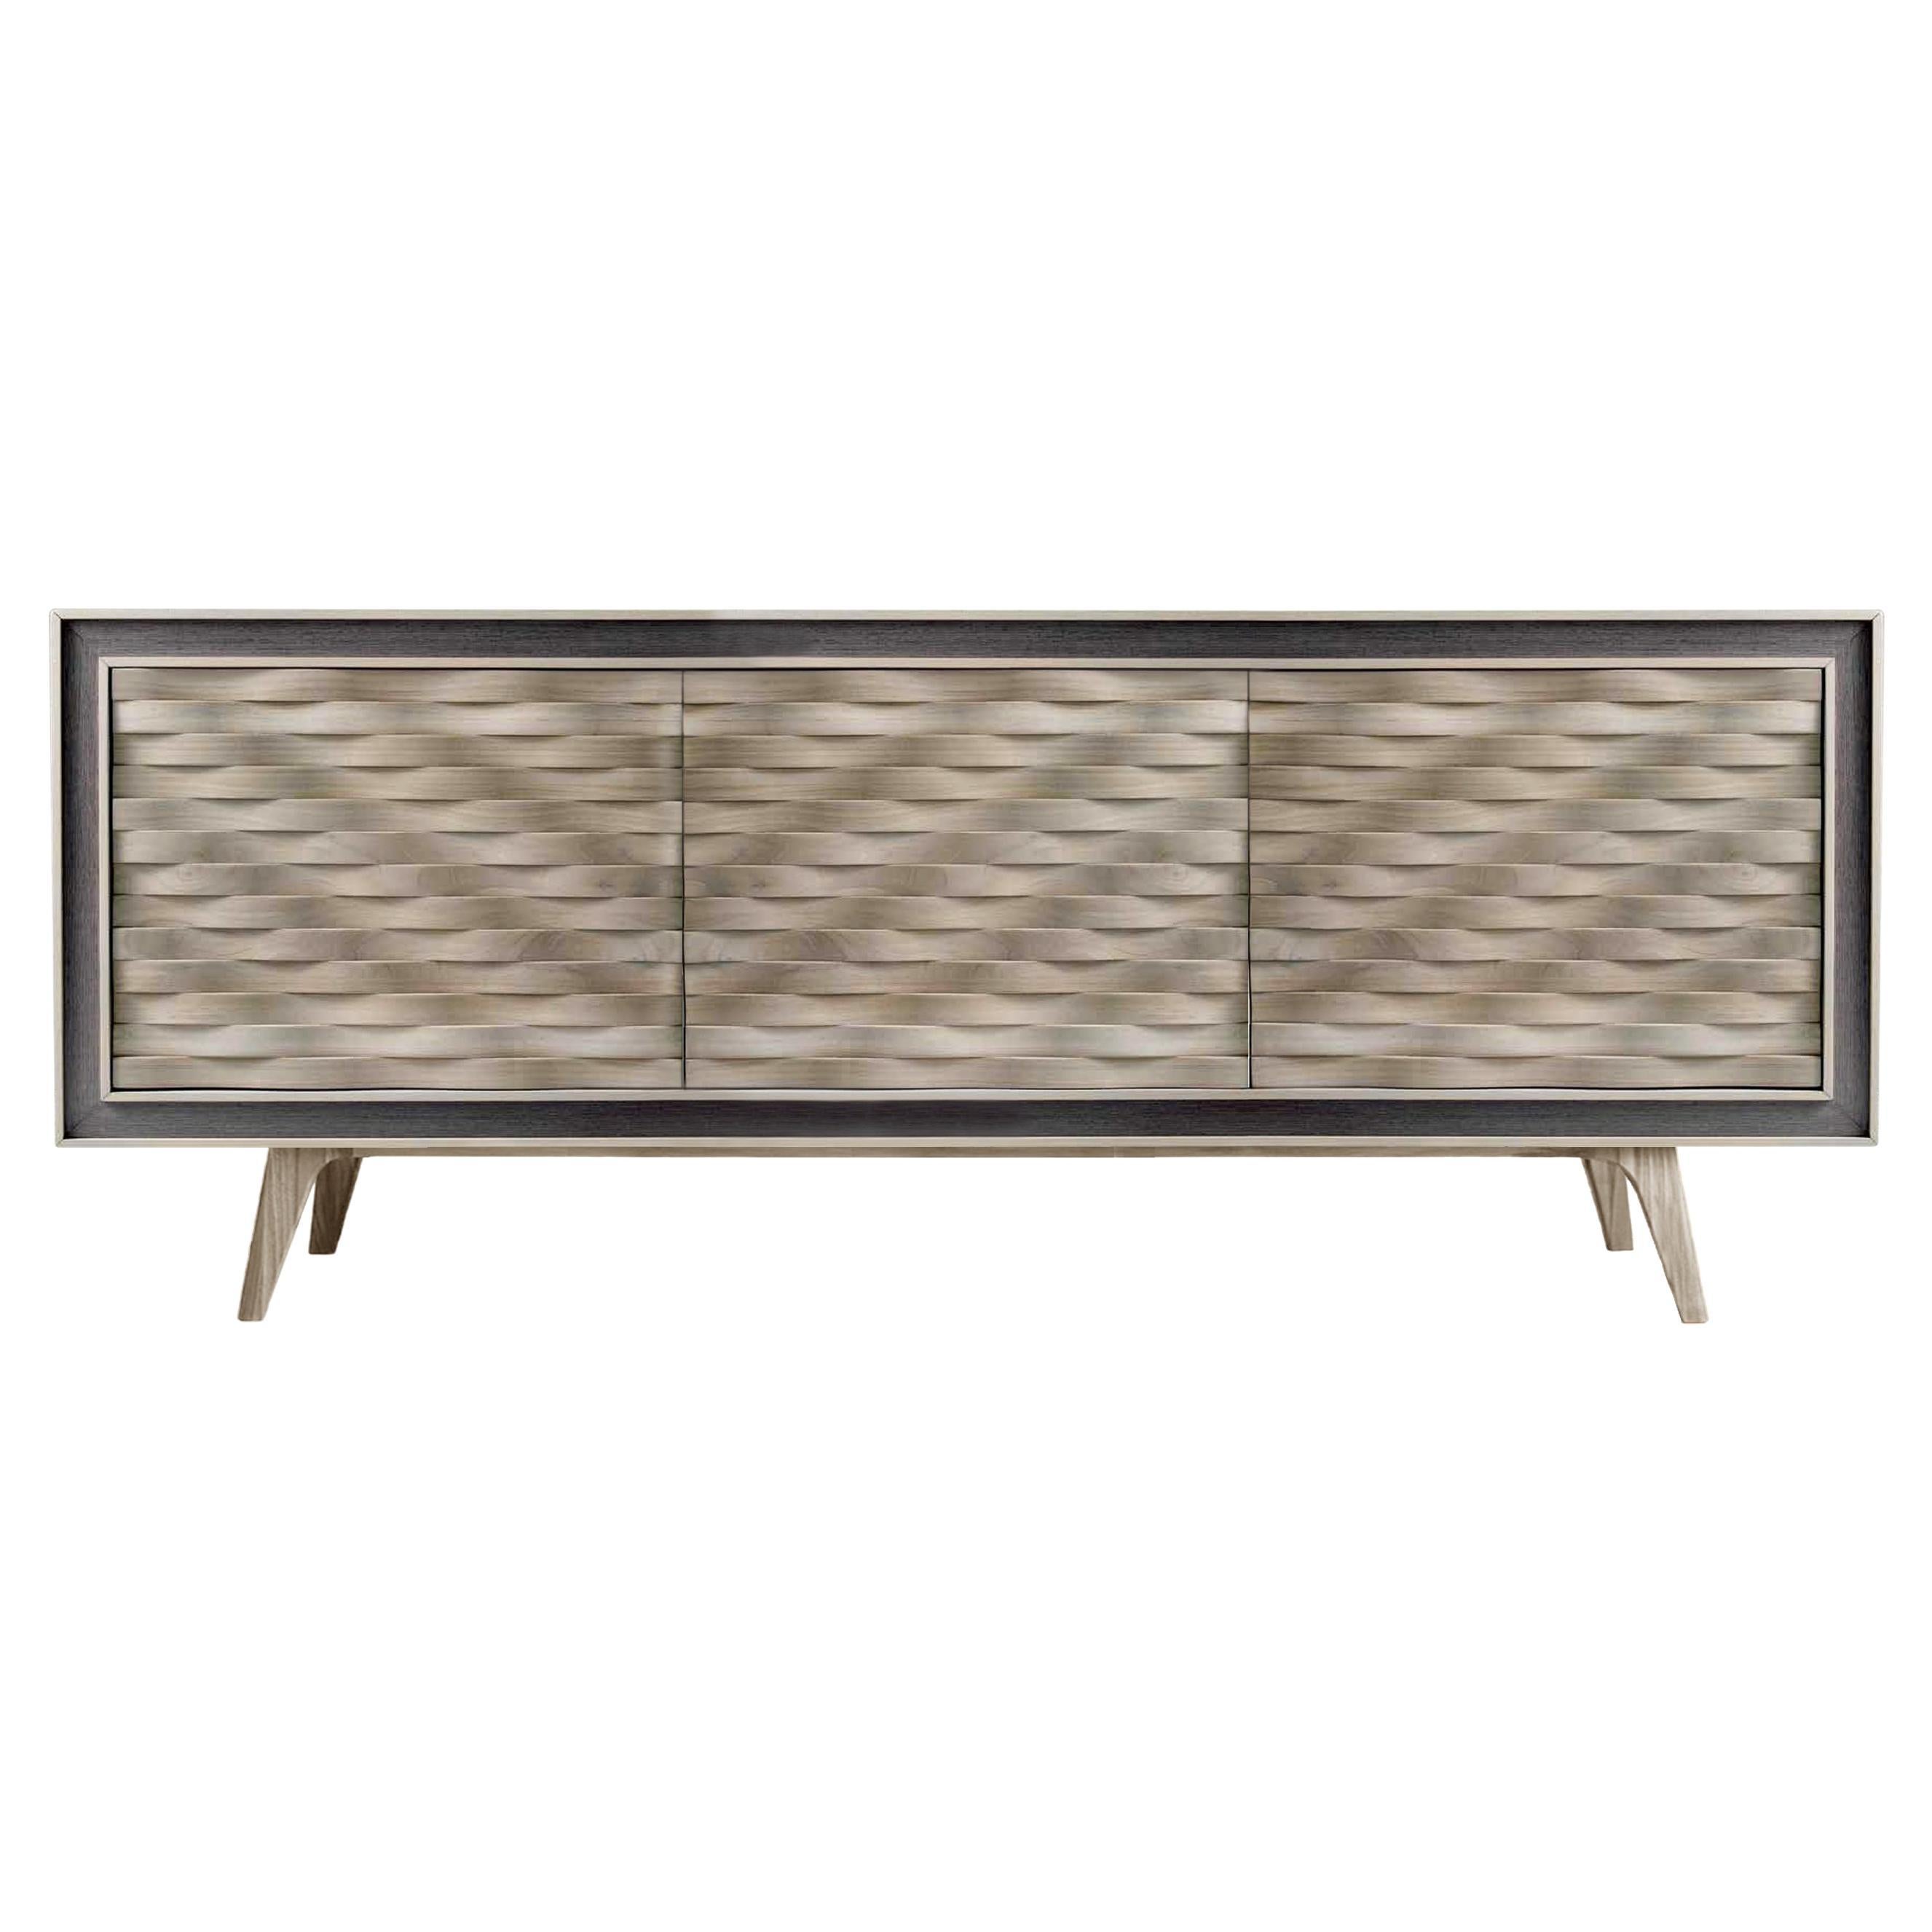 Quadra Nastro Solid Wood Sideboard, Walnut in Natural Grey Finish, Contemporary For Sale